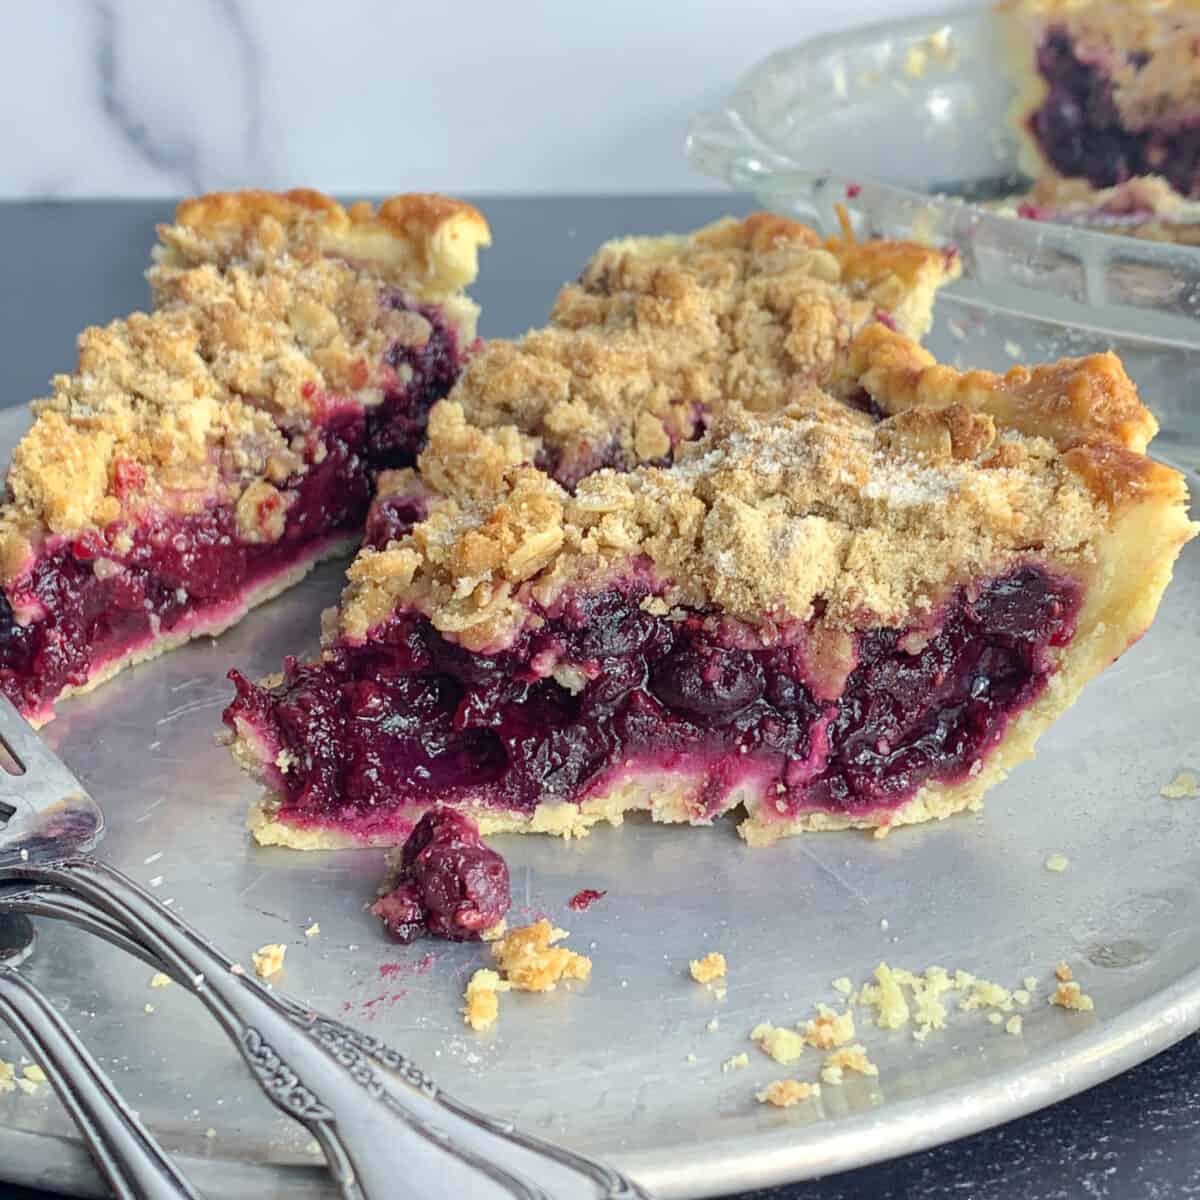 side view of 3 slices of mixed berry pie on silver dish with forks